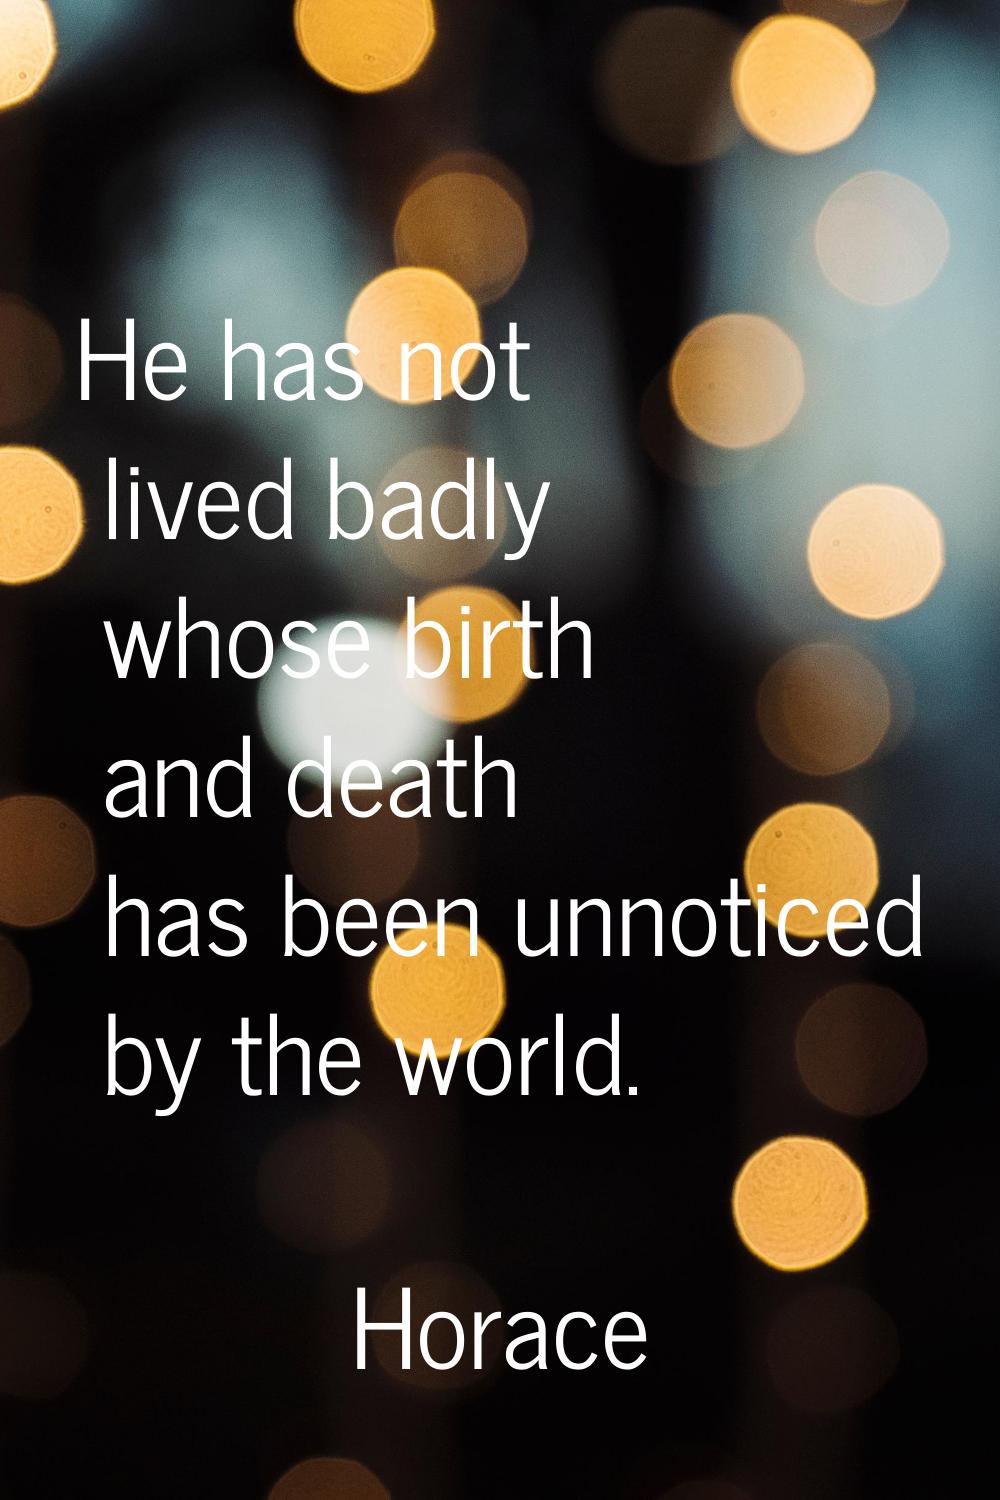 He has not lived badly whose birth and death has been unnoticed by the world.